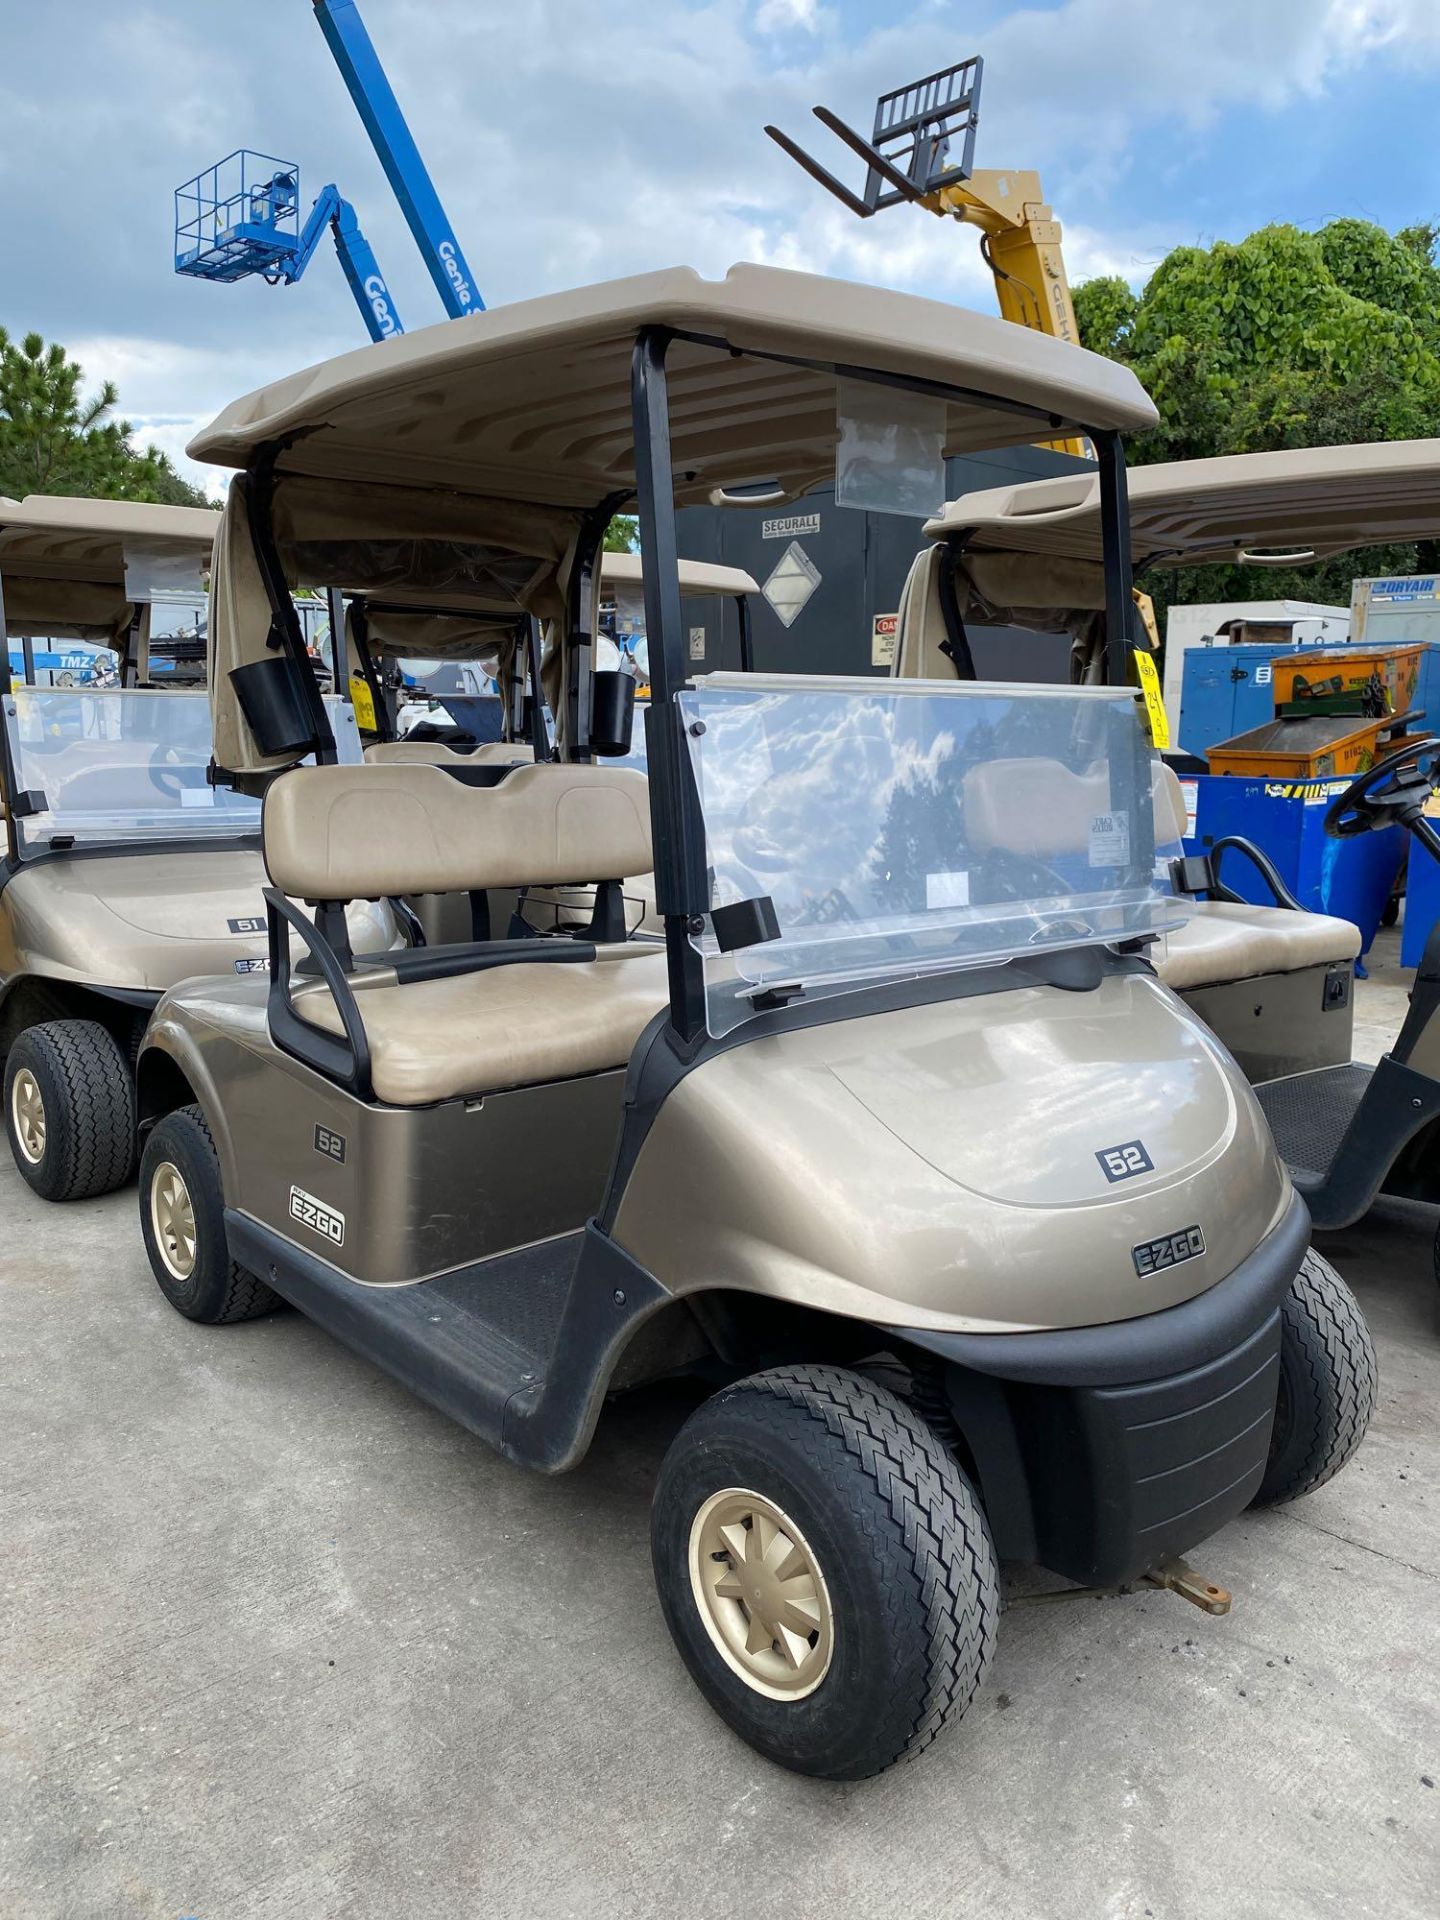 2016 EZ-GO RXV ELECTRIC GOLF CART WITH TROJAN HYDROLINK WATERING SYSTEM BATTERIES, EX-GO DELTA-Q SC- - Image 2 of 5